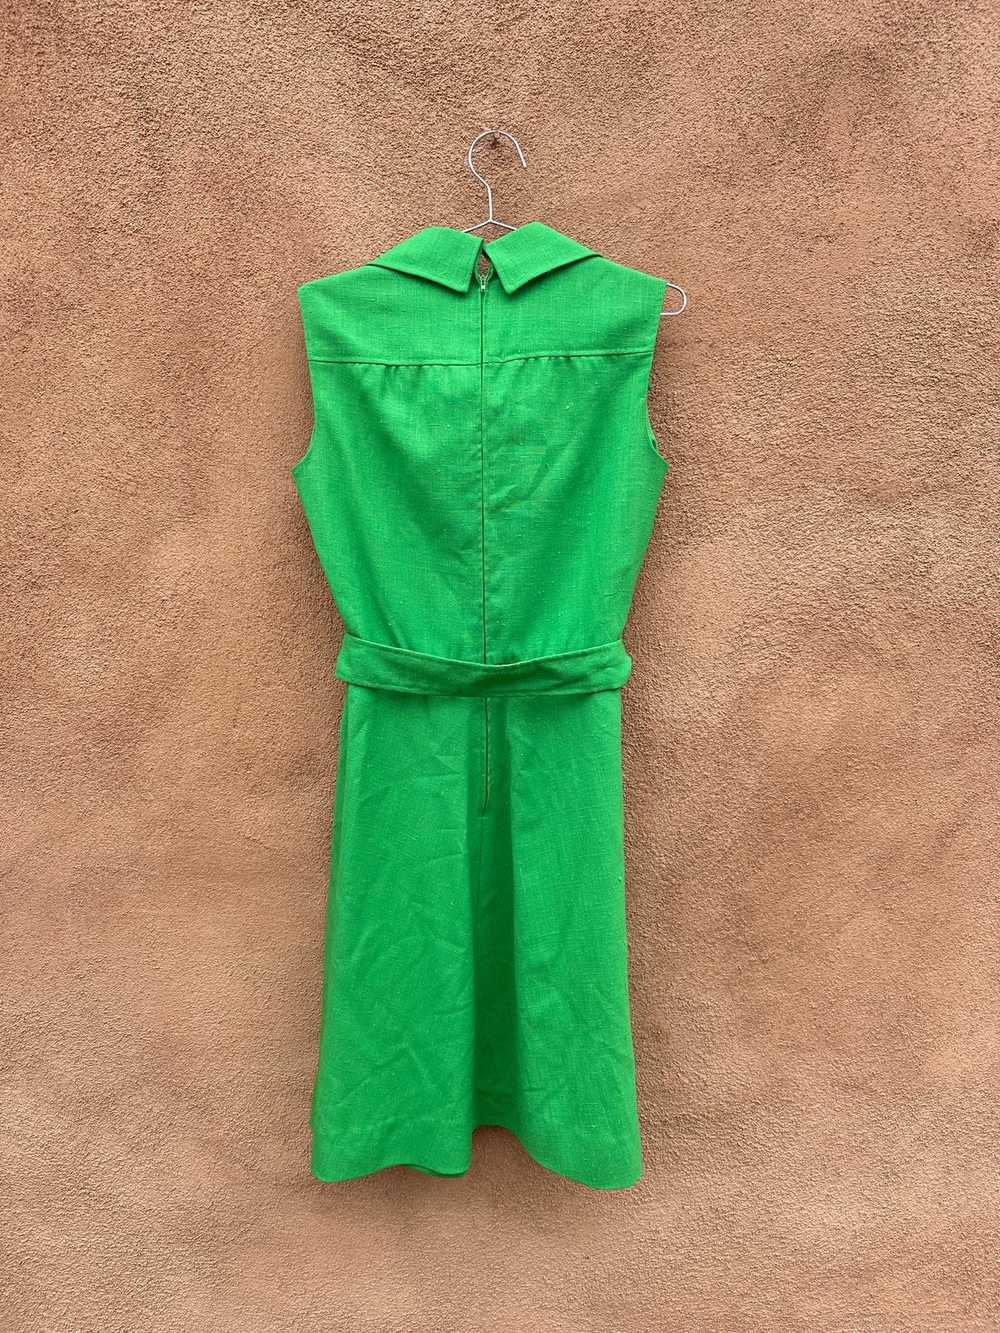 1960's Green Belted Cotton Dress - image 3